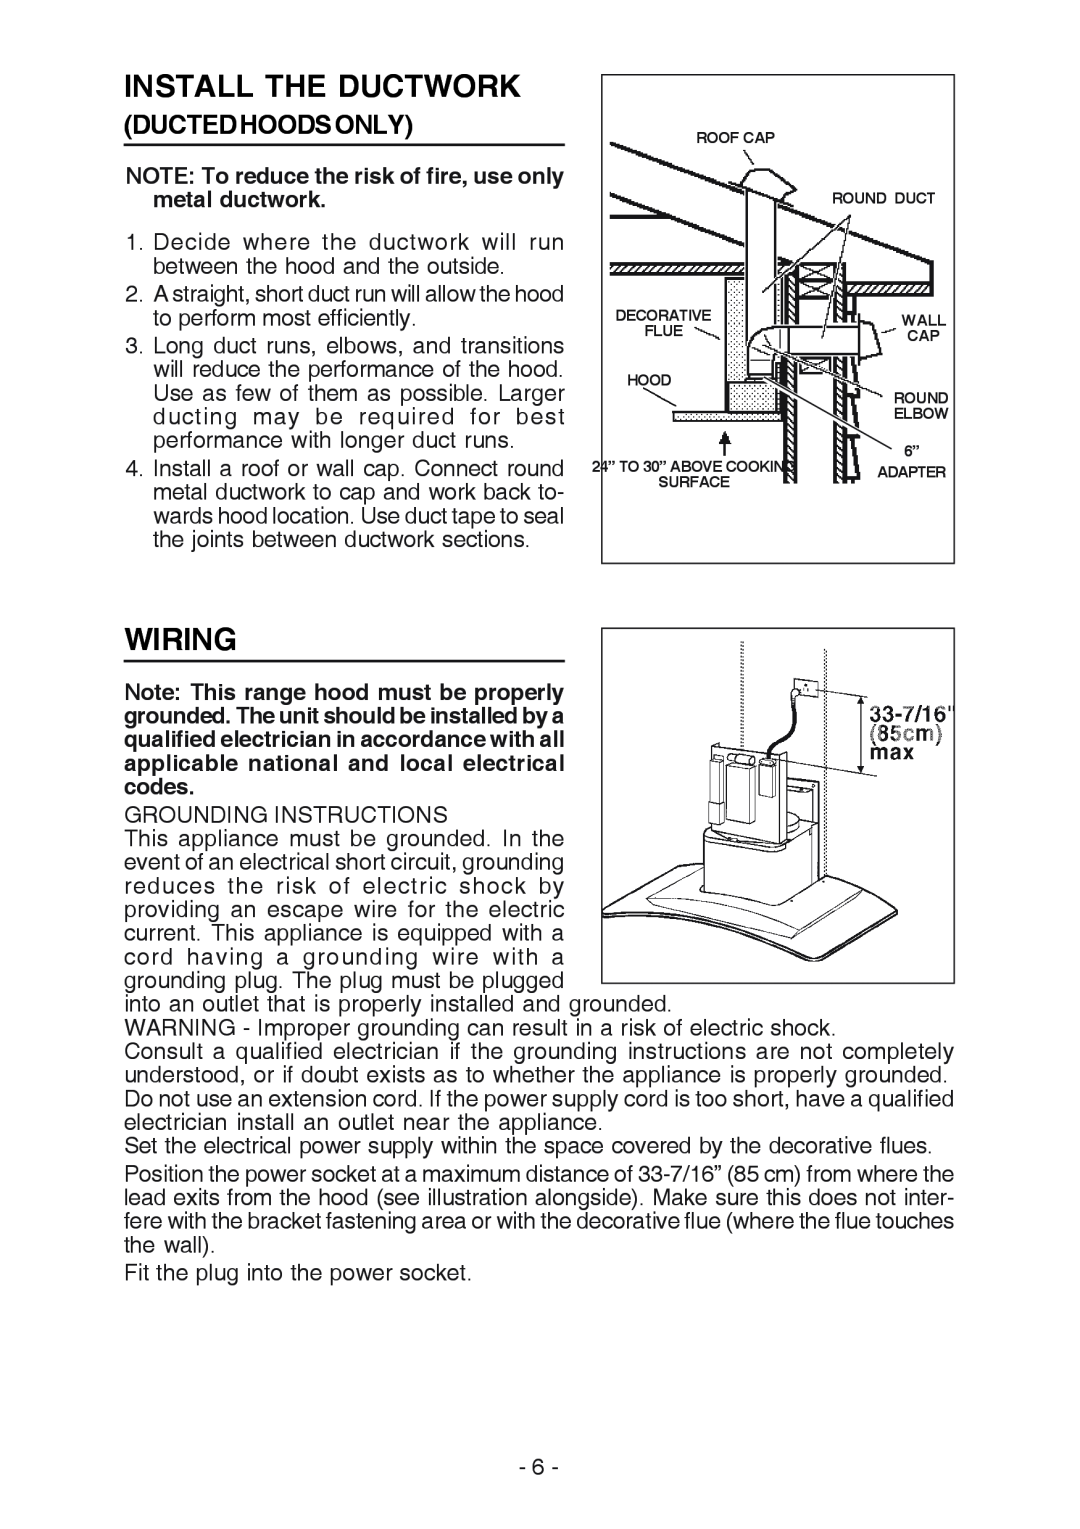 Broan K7388 manual Install The Ductwork, Wiring, Ductedhoodsonly, NOTE To reduce the risk of fire, use only metal ductwork 